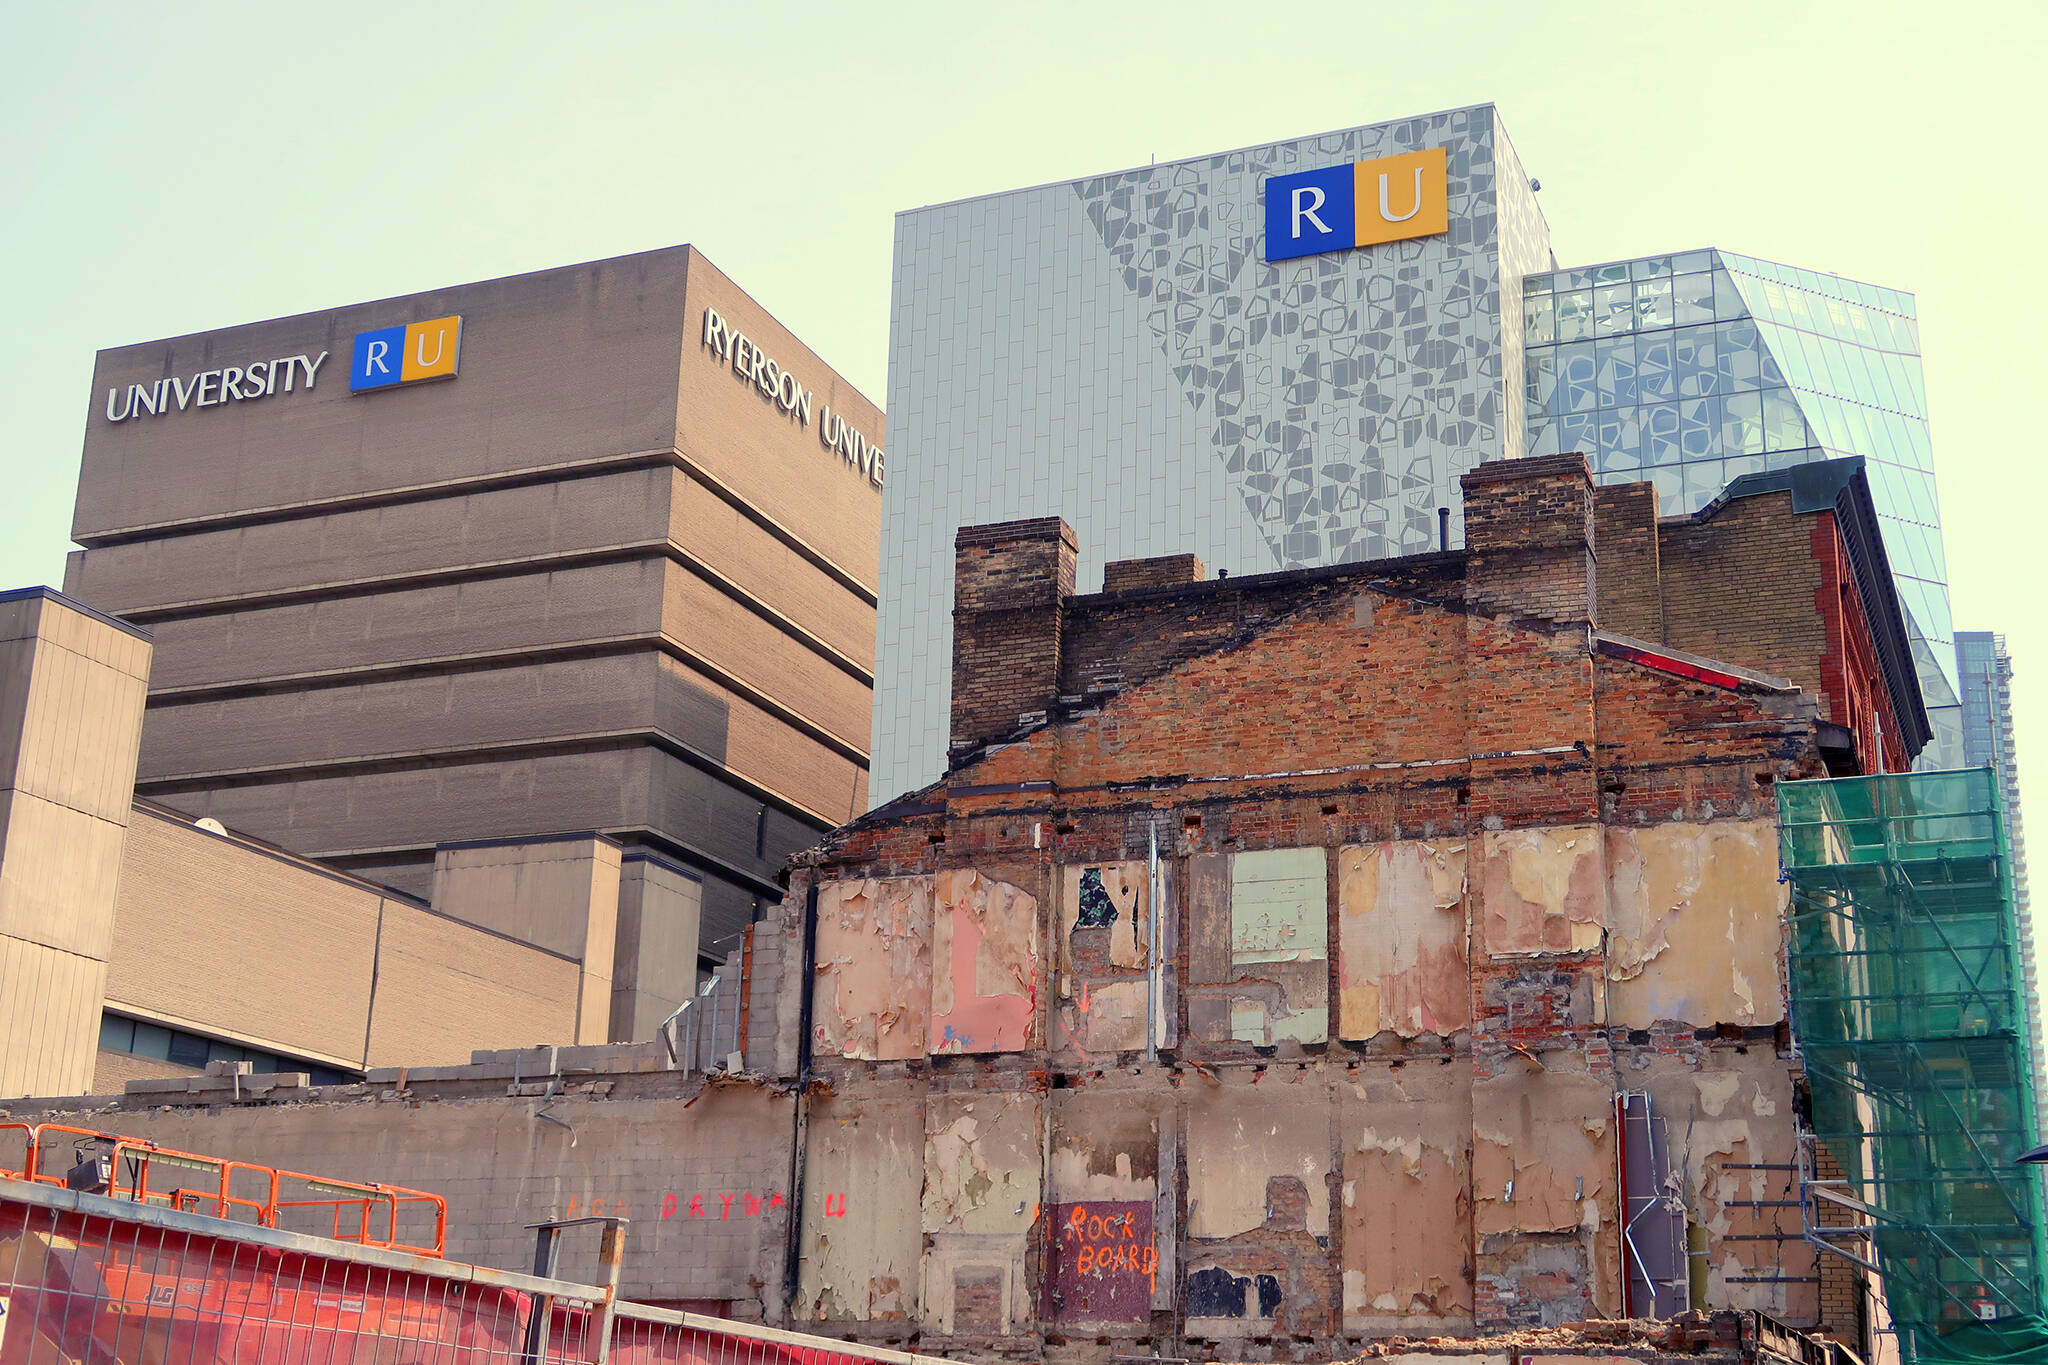 Ryerson University is officially going to change its name